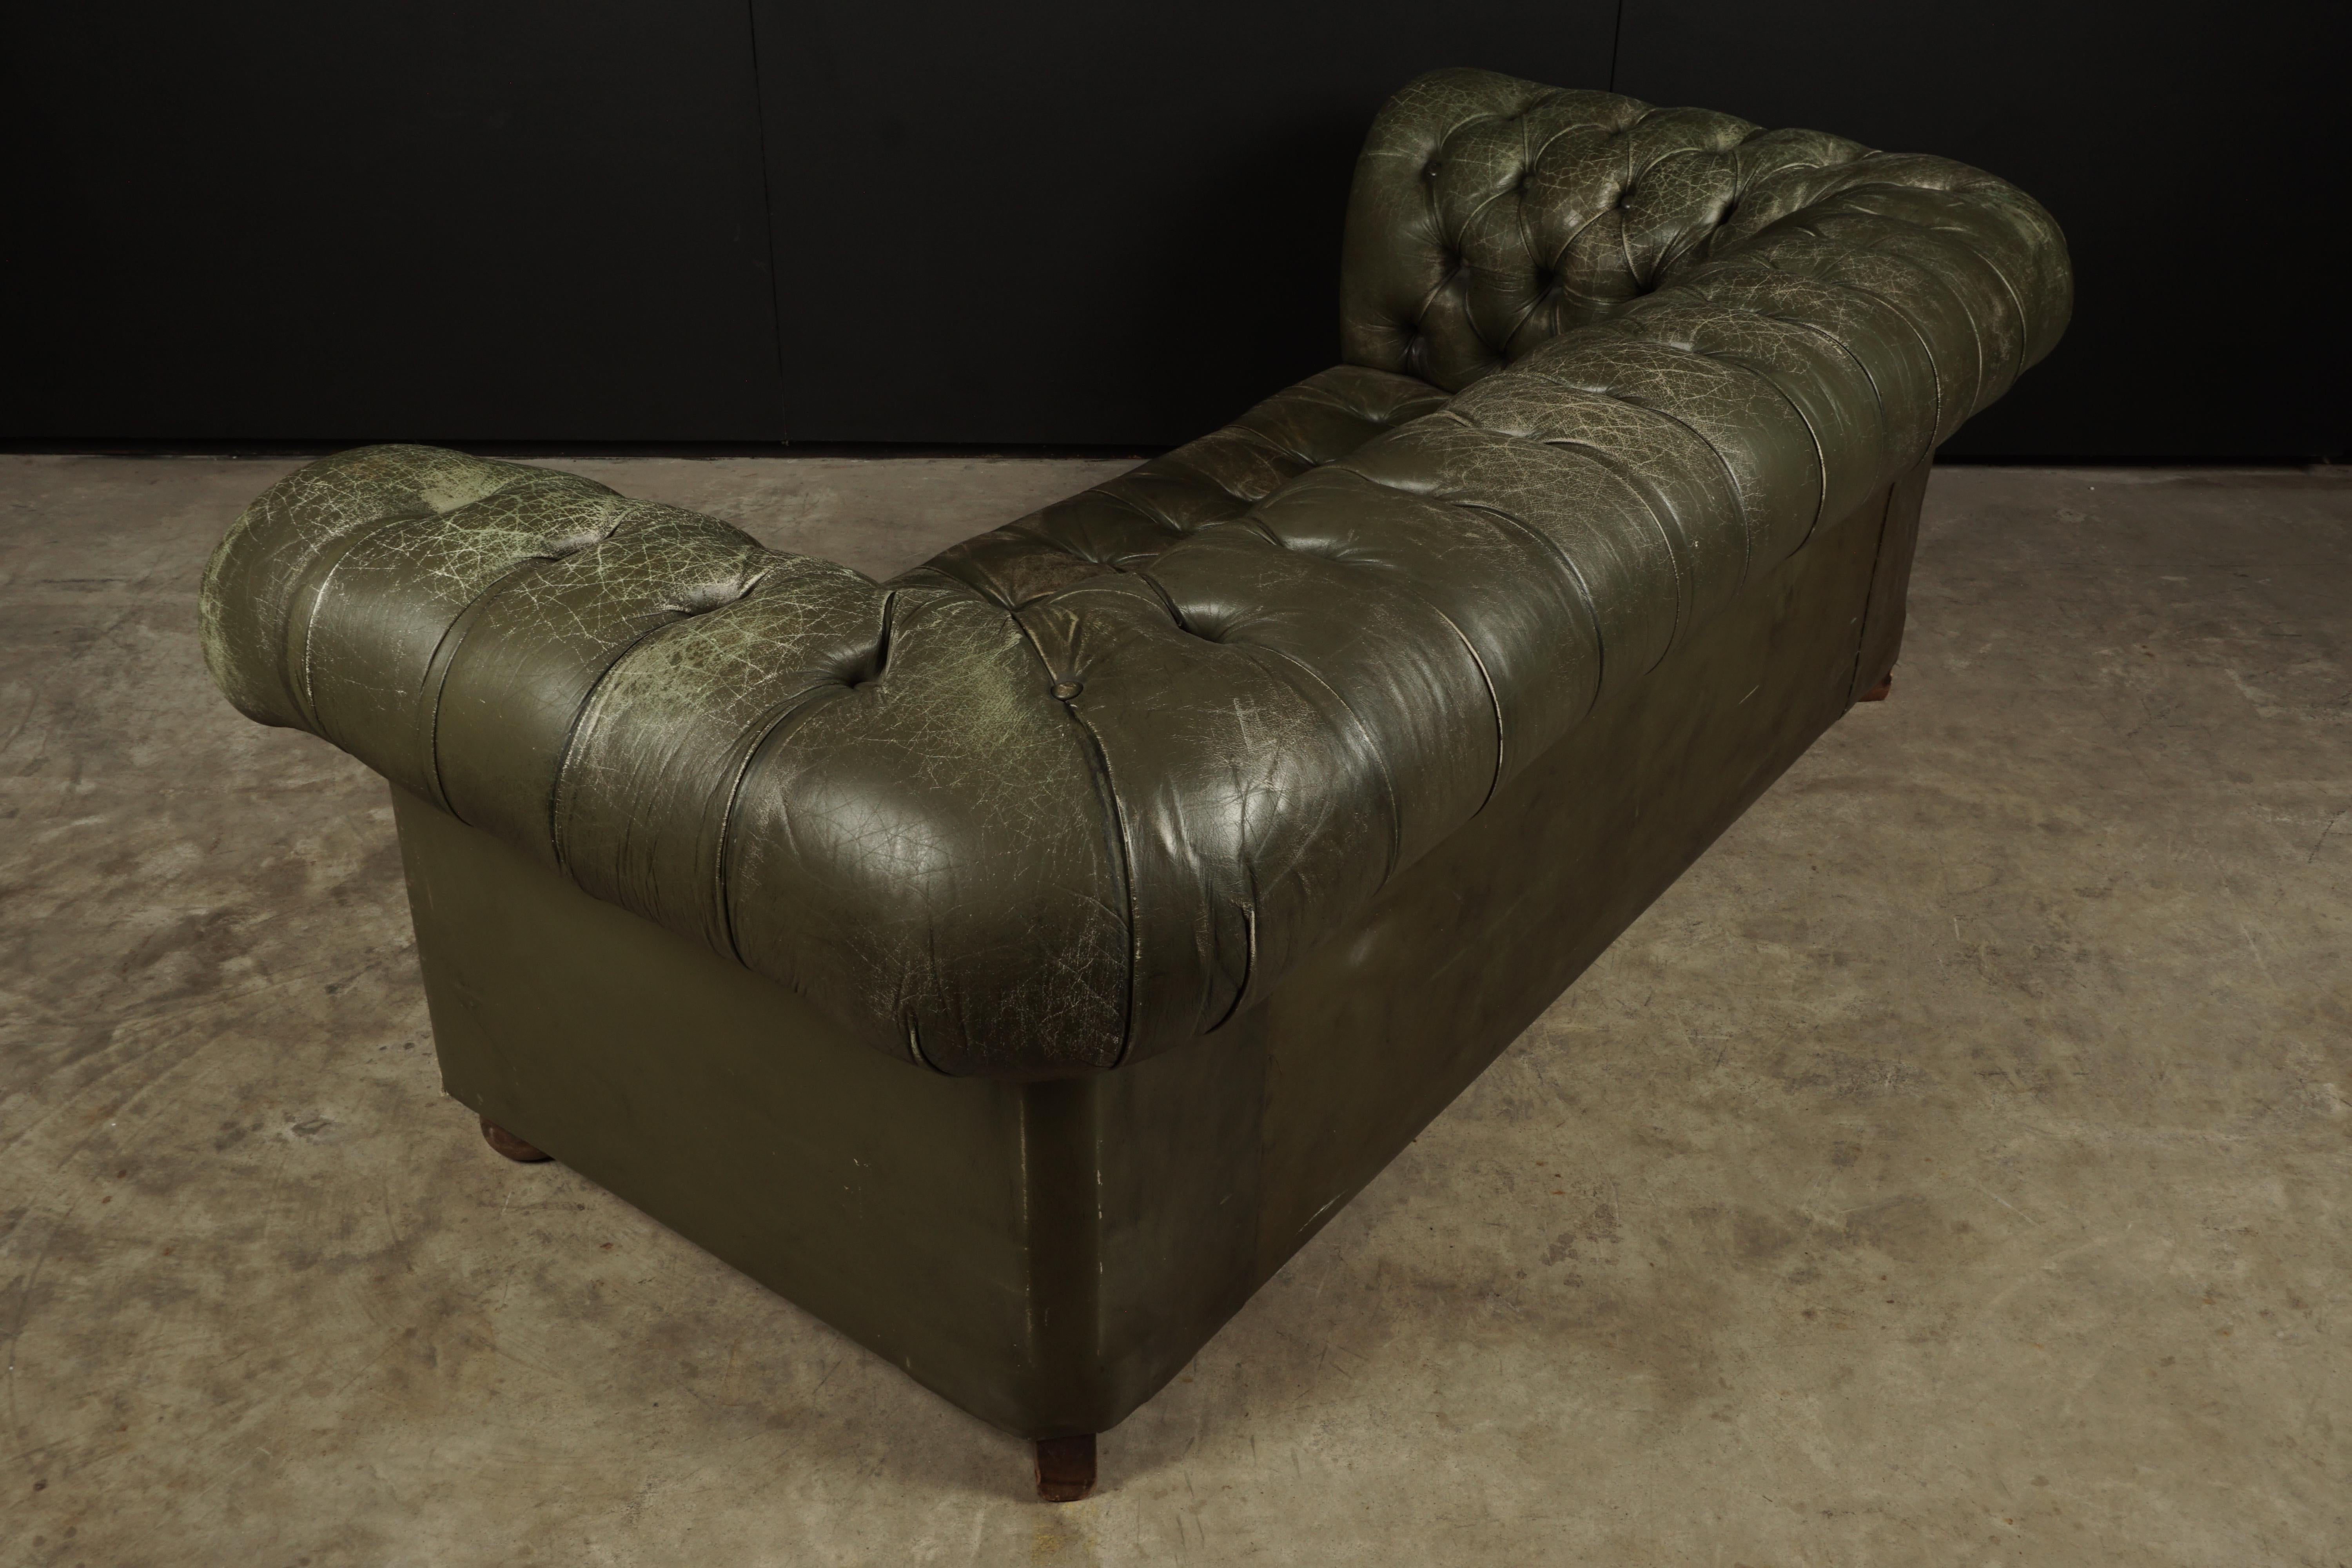 European Vintage Leather Chesterfield Sofa from England, circa 1960